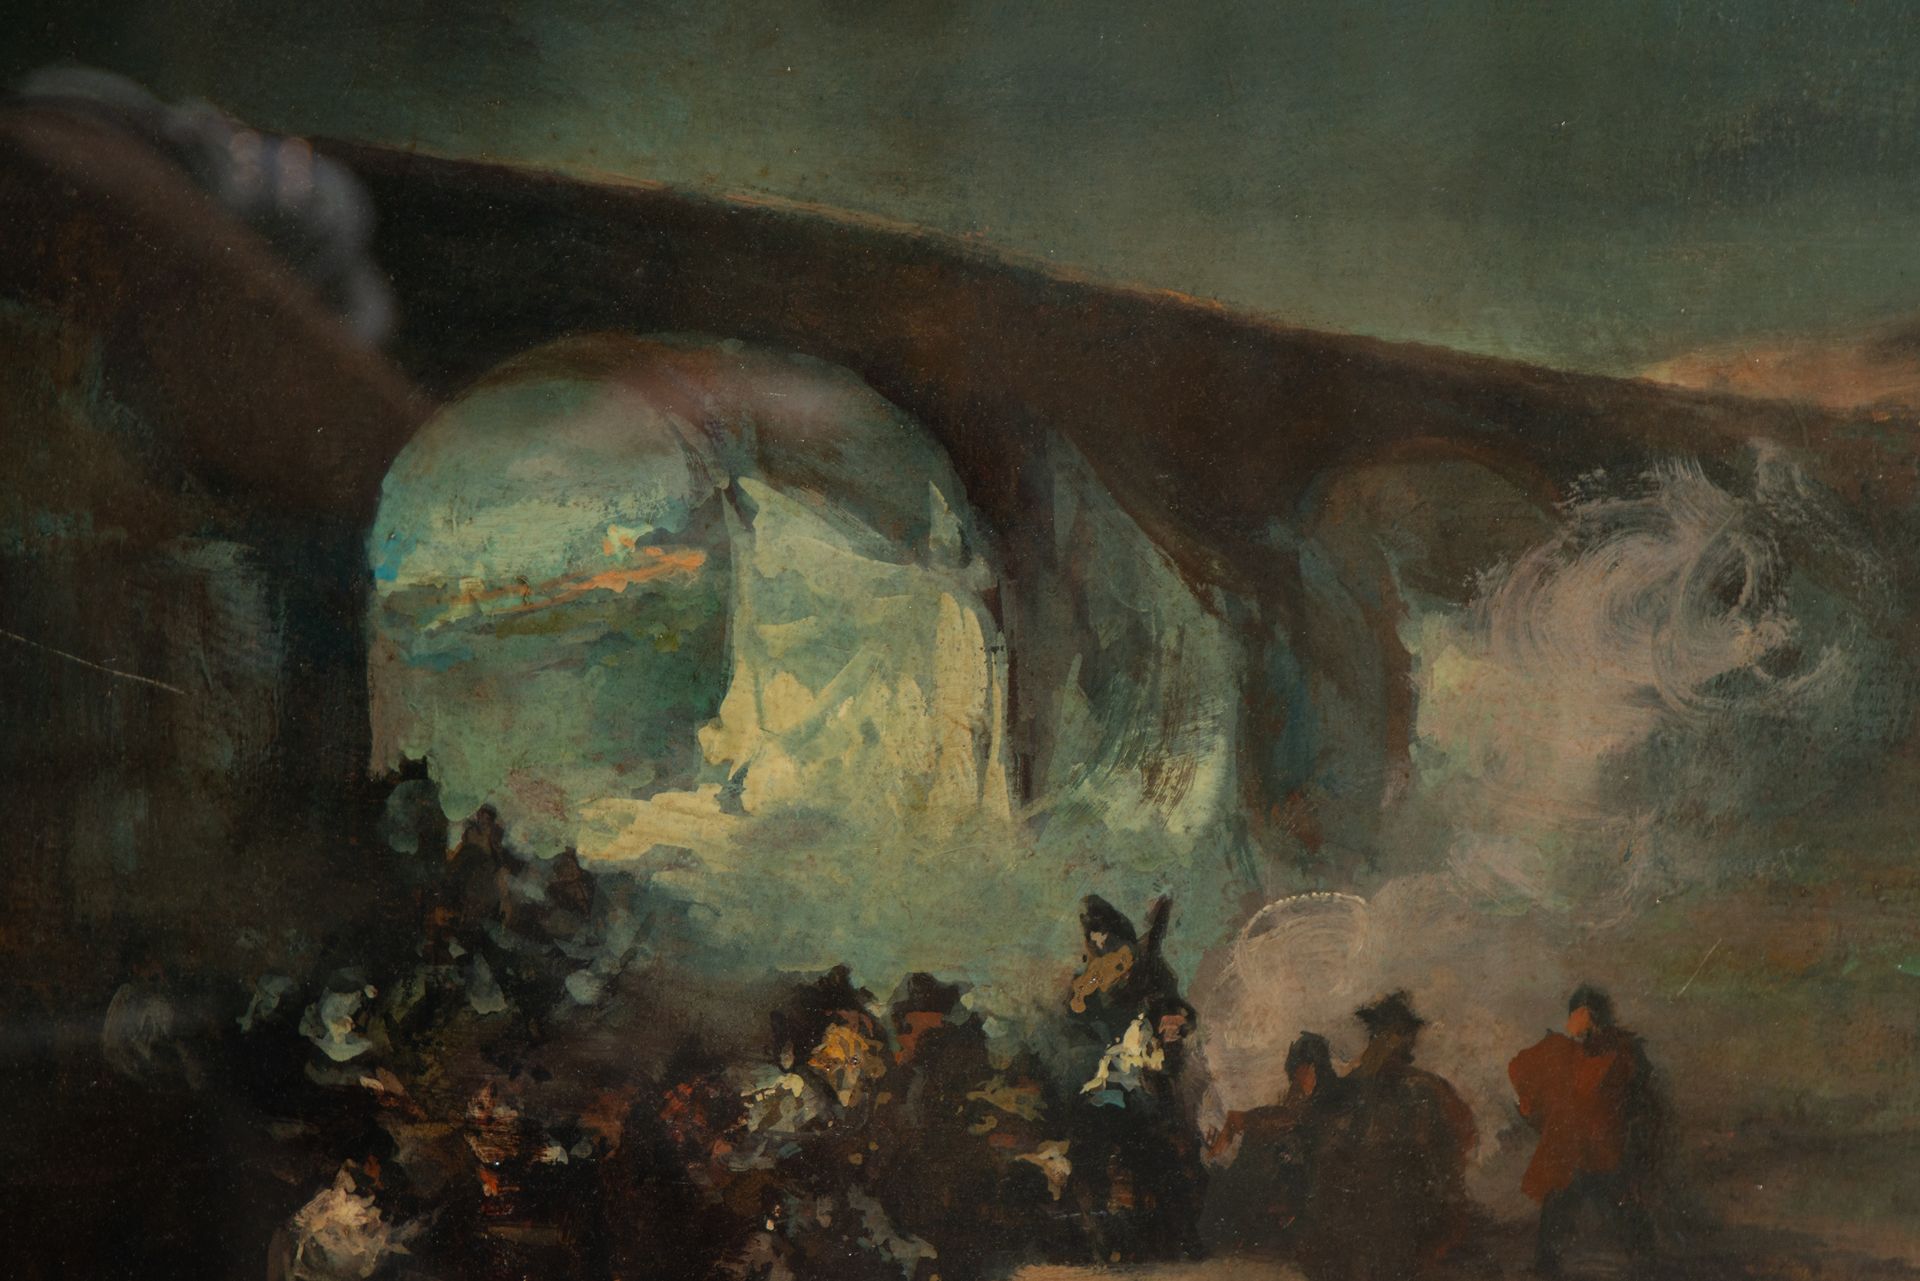 Bandits in the Cave, signed and certified Eugenio Lucas Vilaamil, 1861, 19th century Spanish school - Bild 4 aus 10